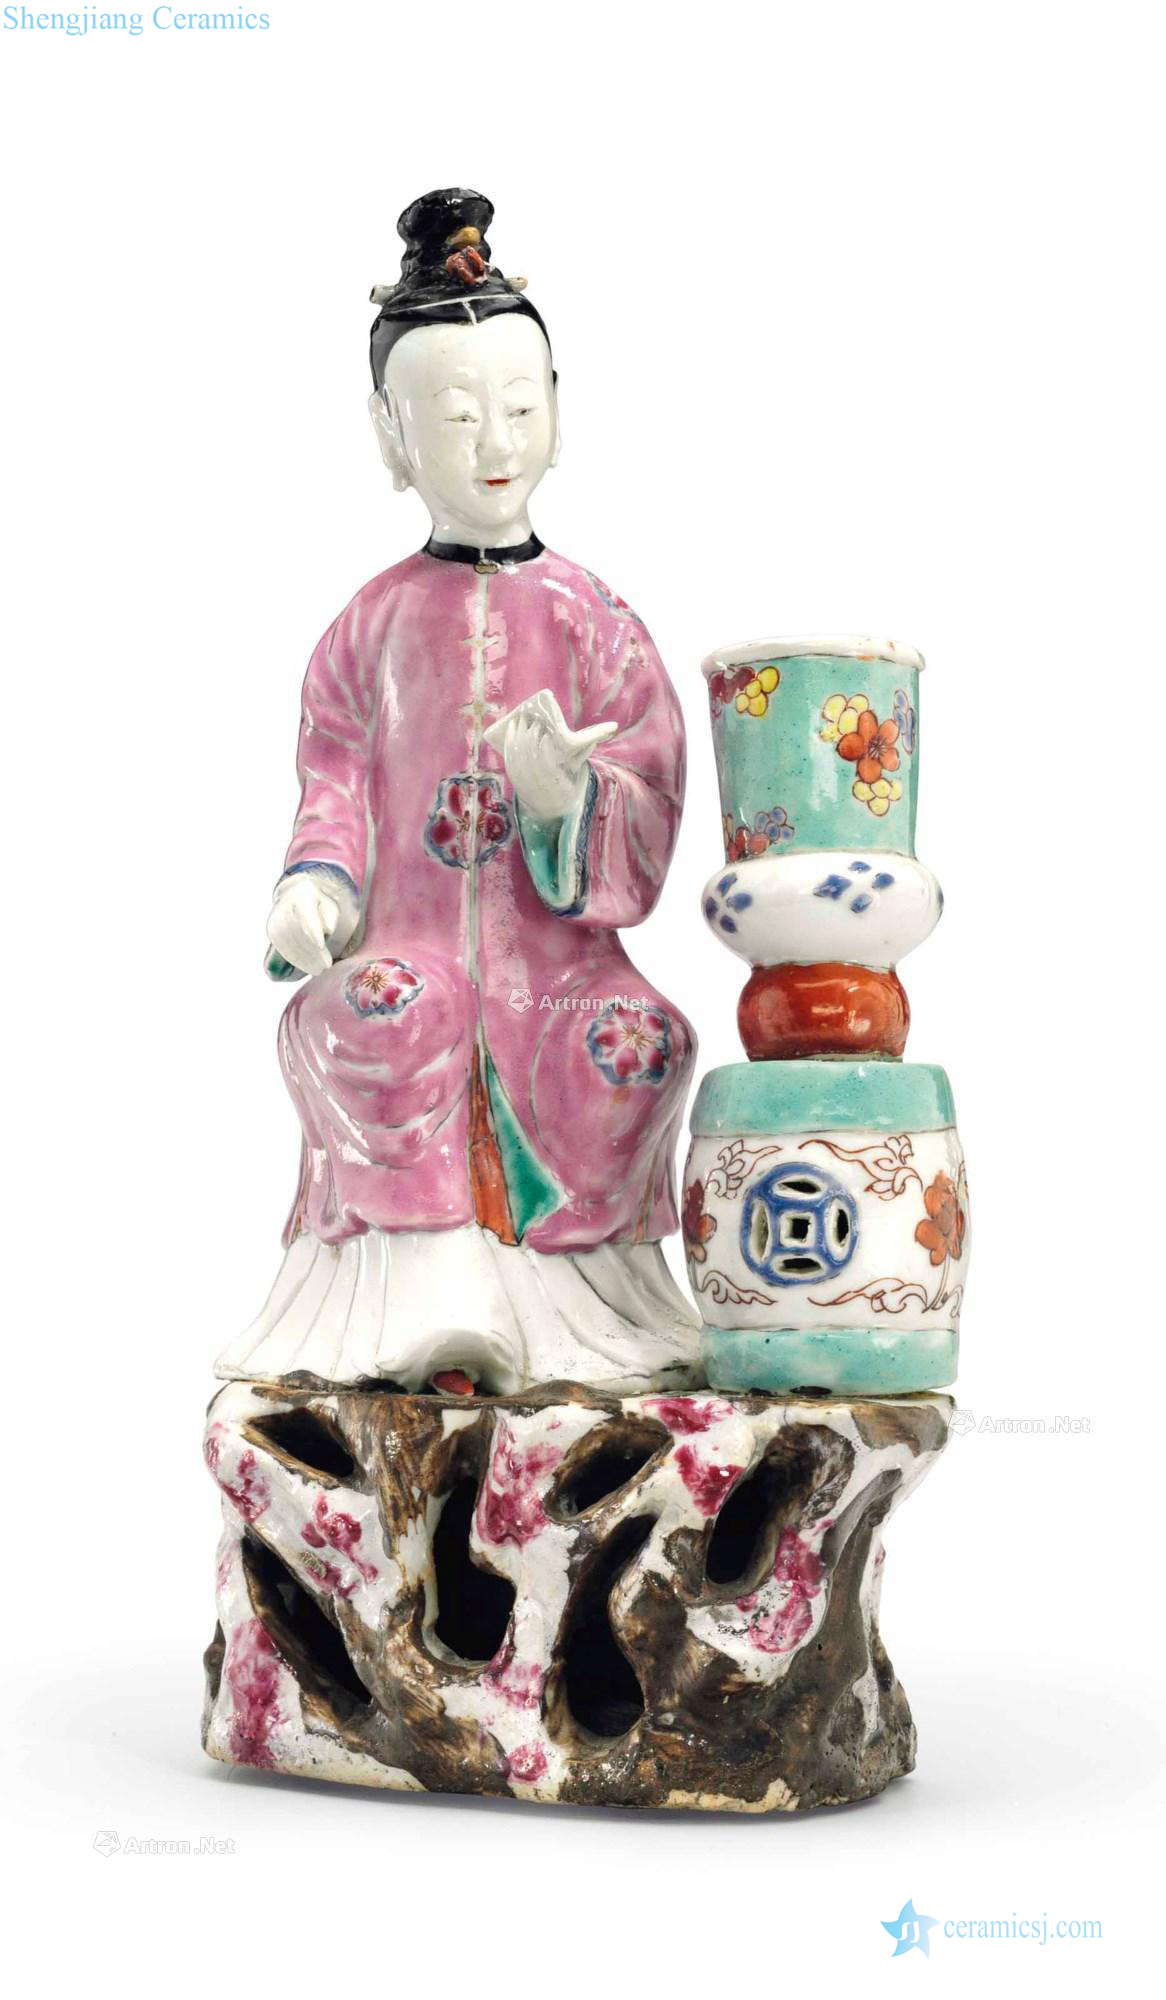 The qianlong period, 1736-1795 - A SMALL FAMILLE ROSE COURT LADY CANDLEHOLDER